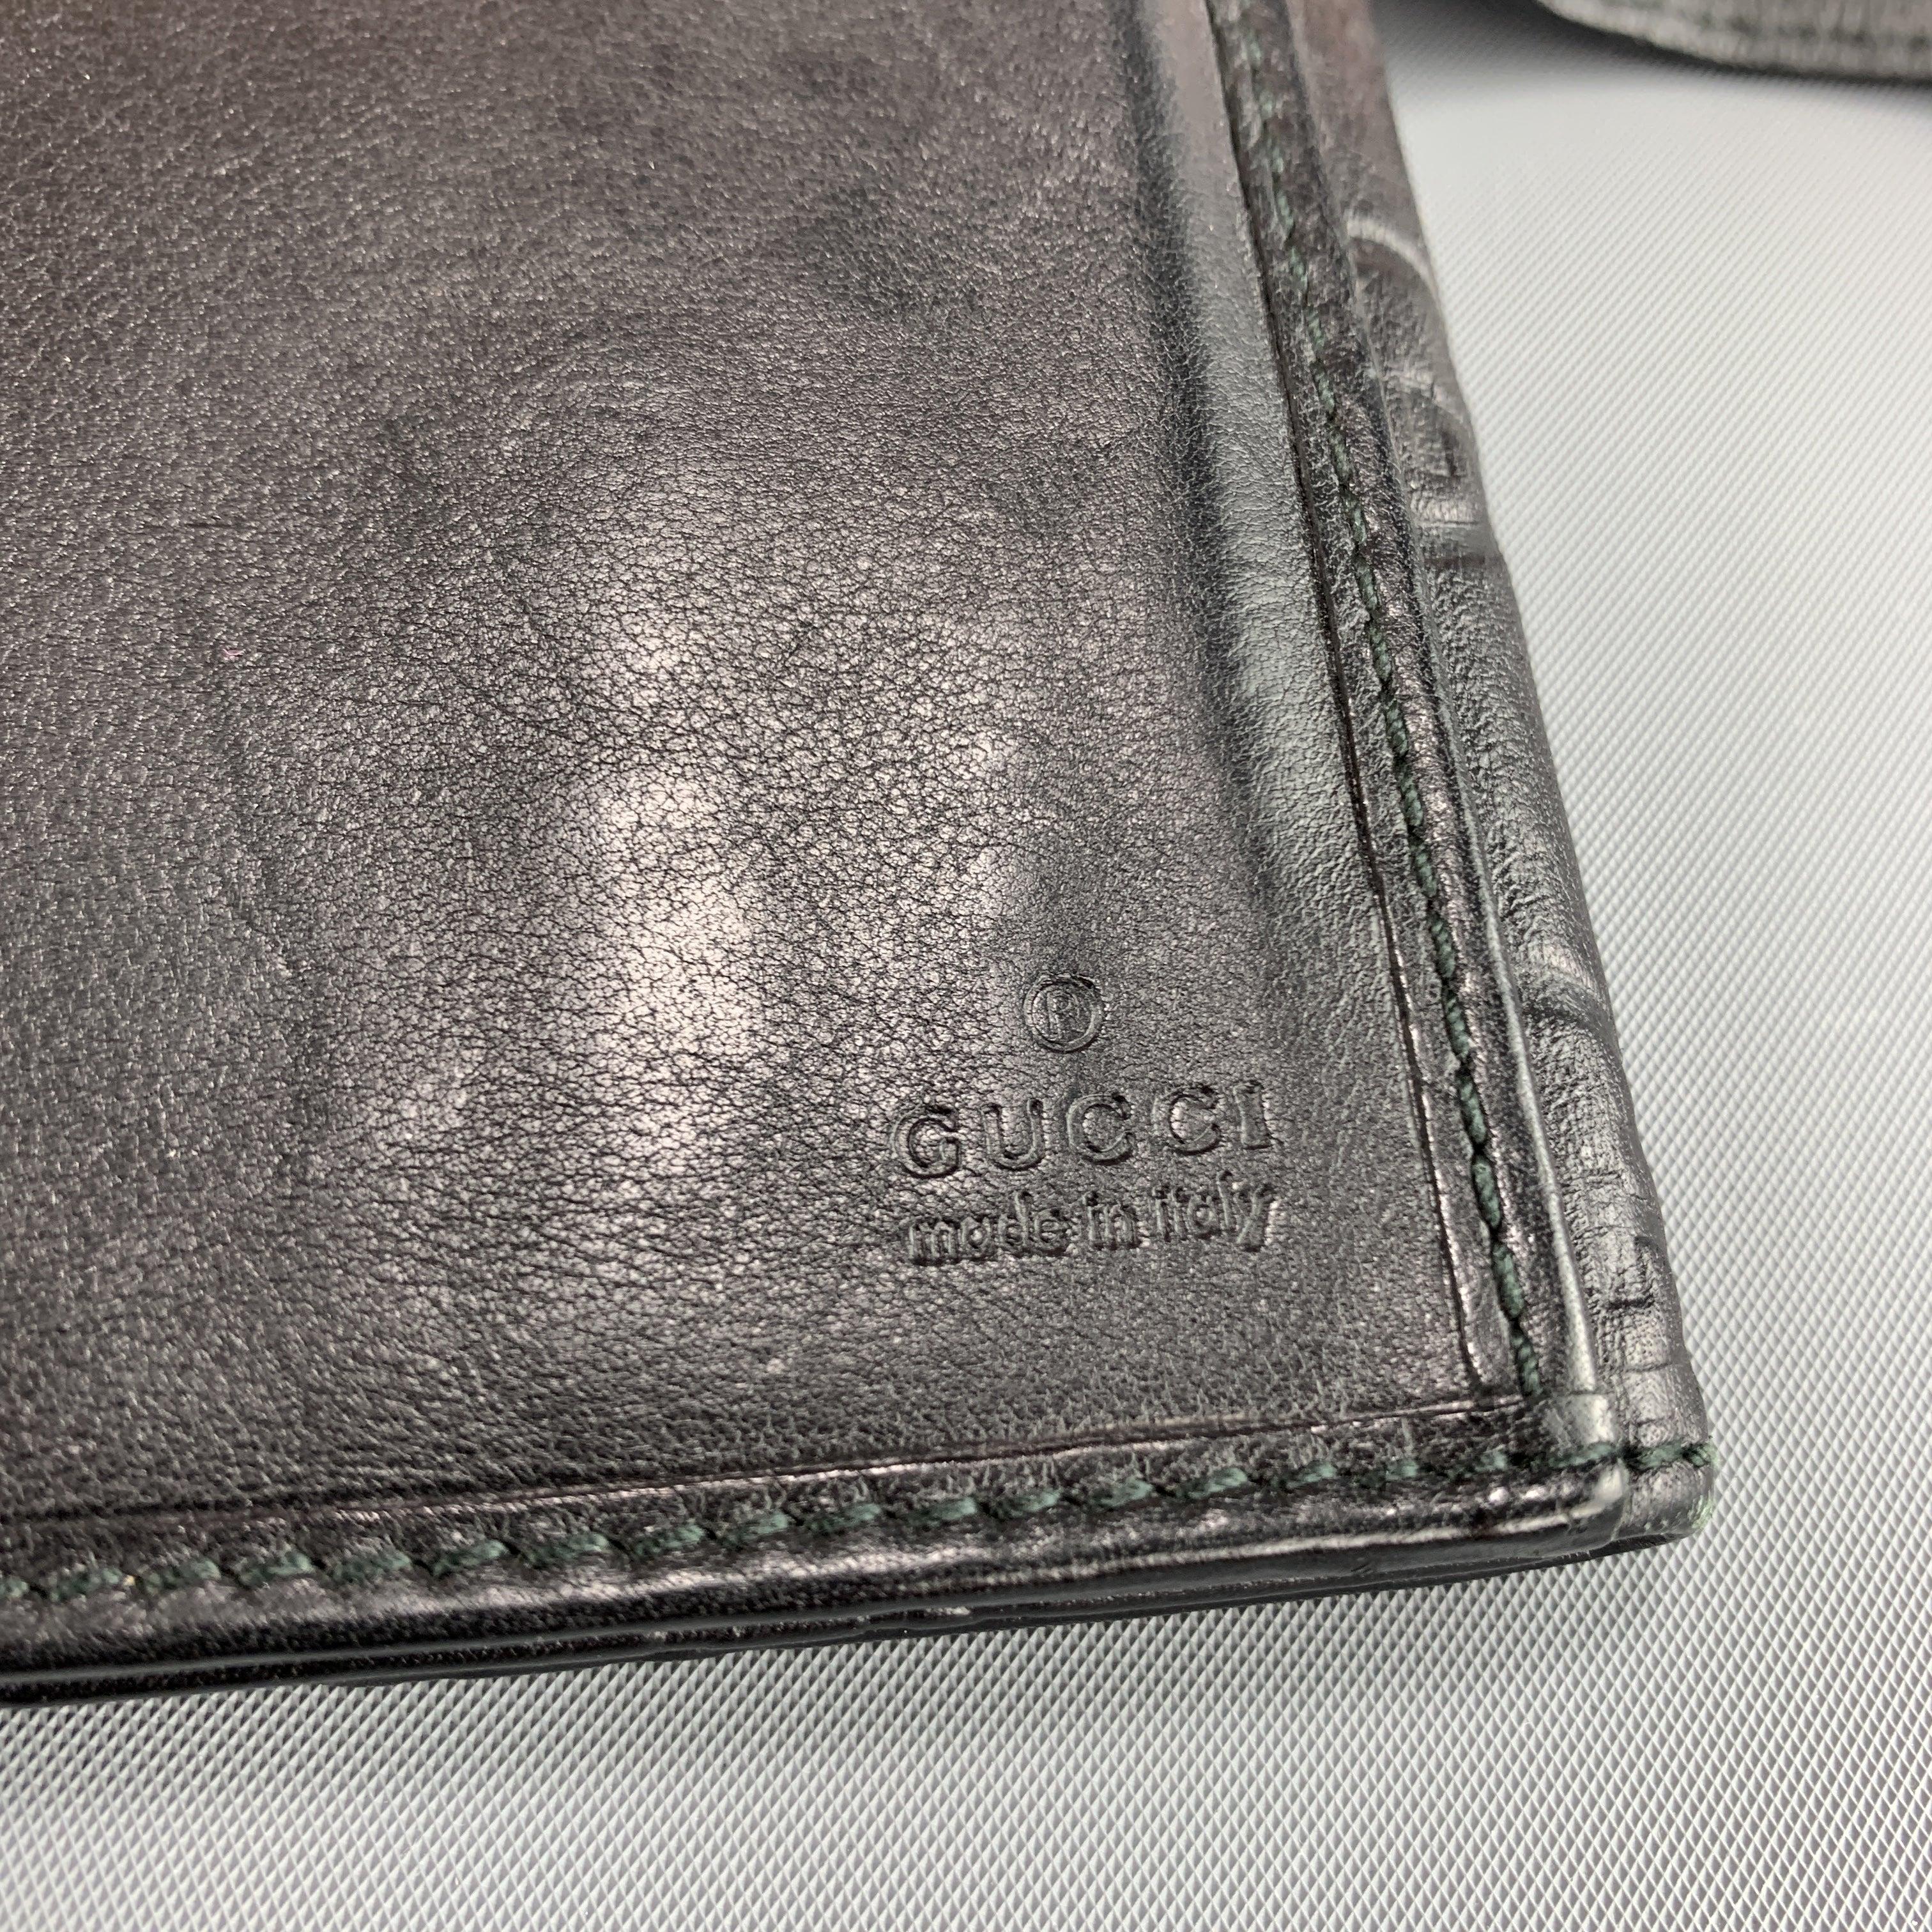 GUCCI Monogram Embossed Black Leather Checkbook Wallet For Sale 6